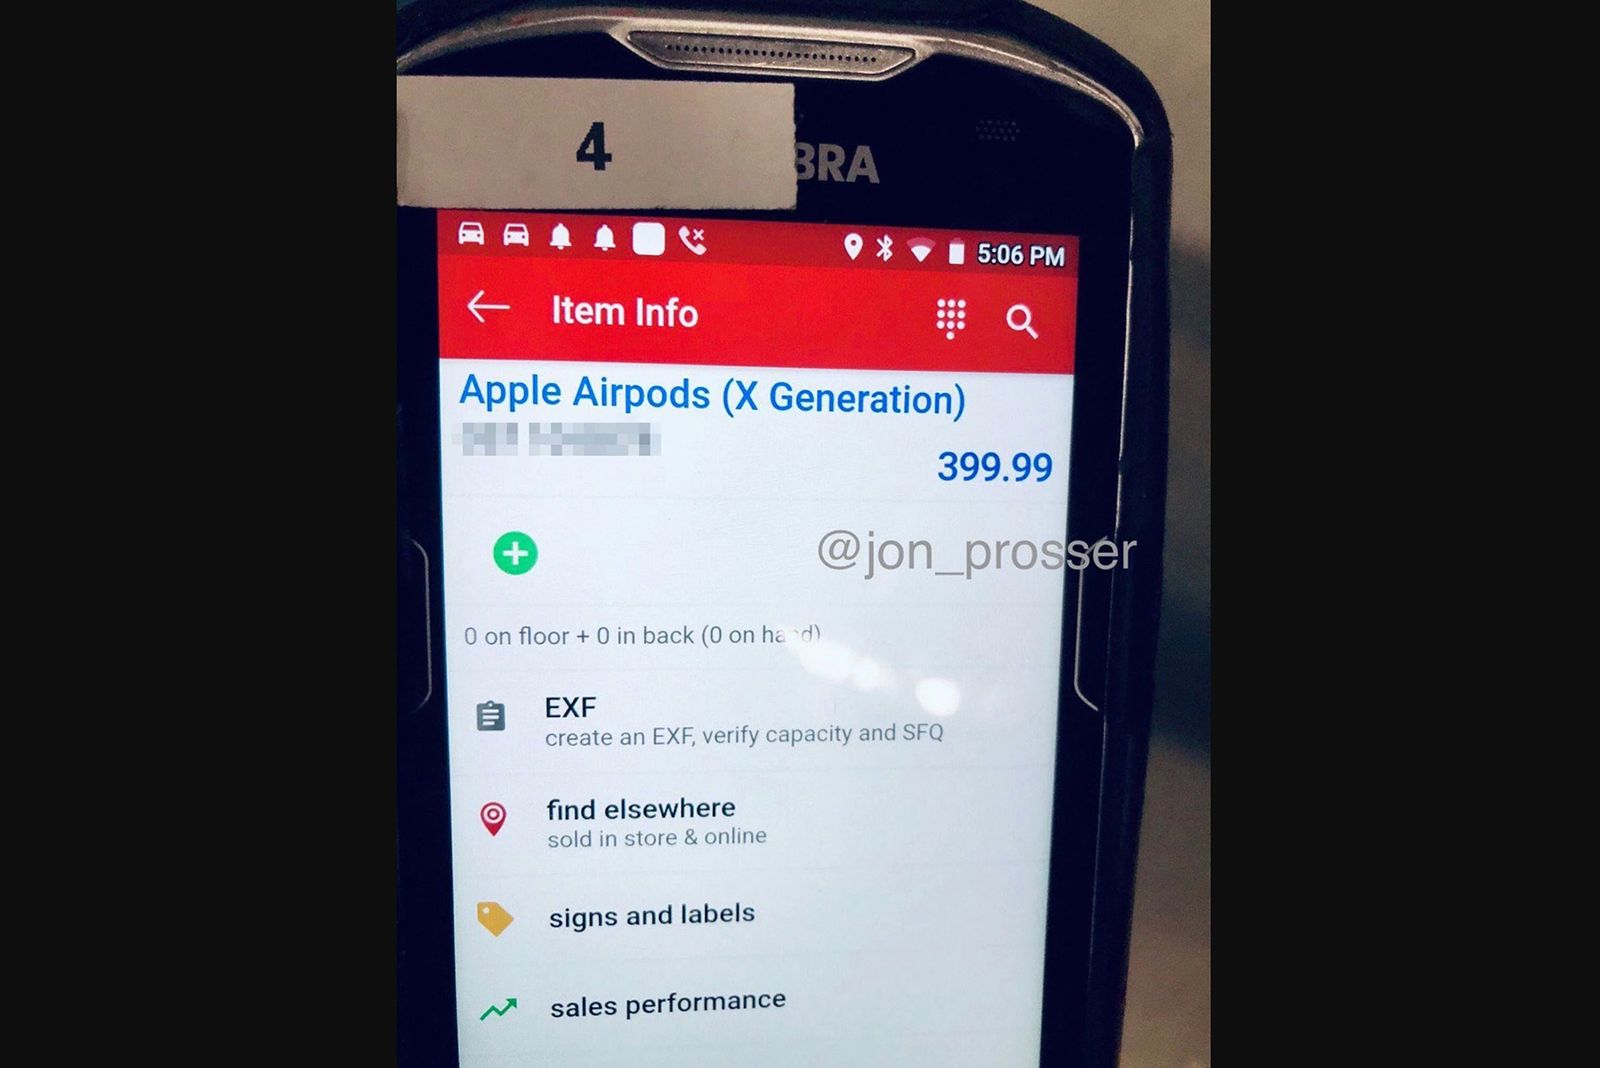 Airpods Over-ear Headphones And Other New Apple Devices Spotted In Target Inventory Leak image 1